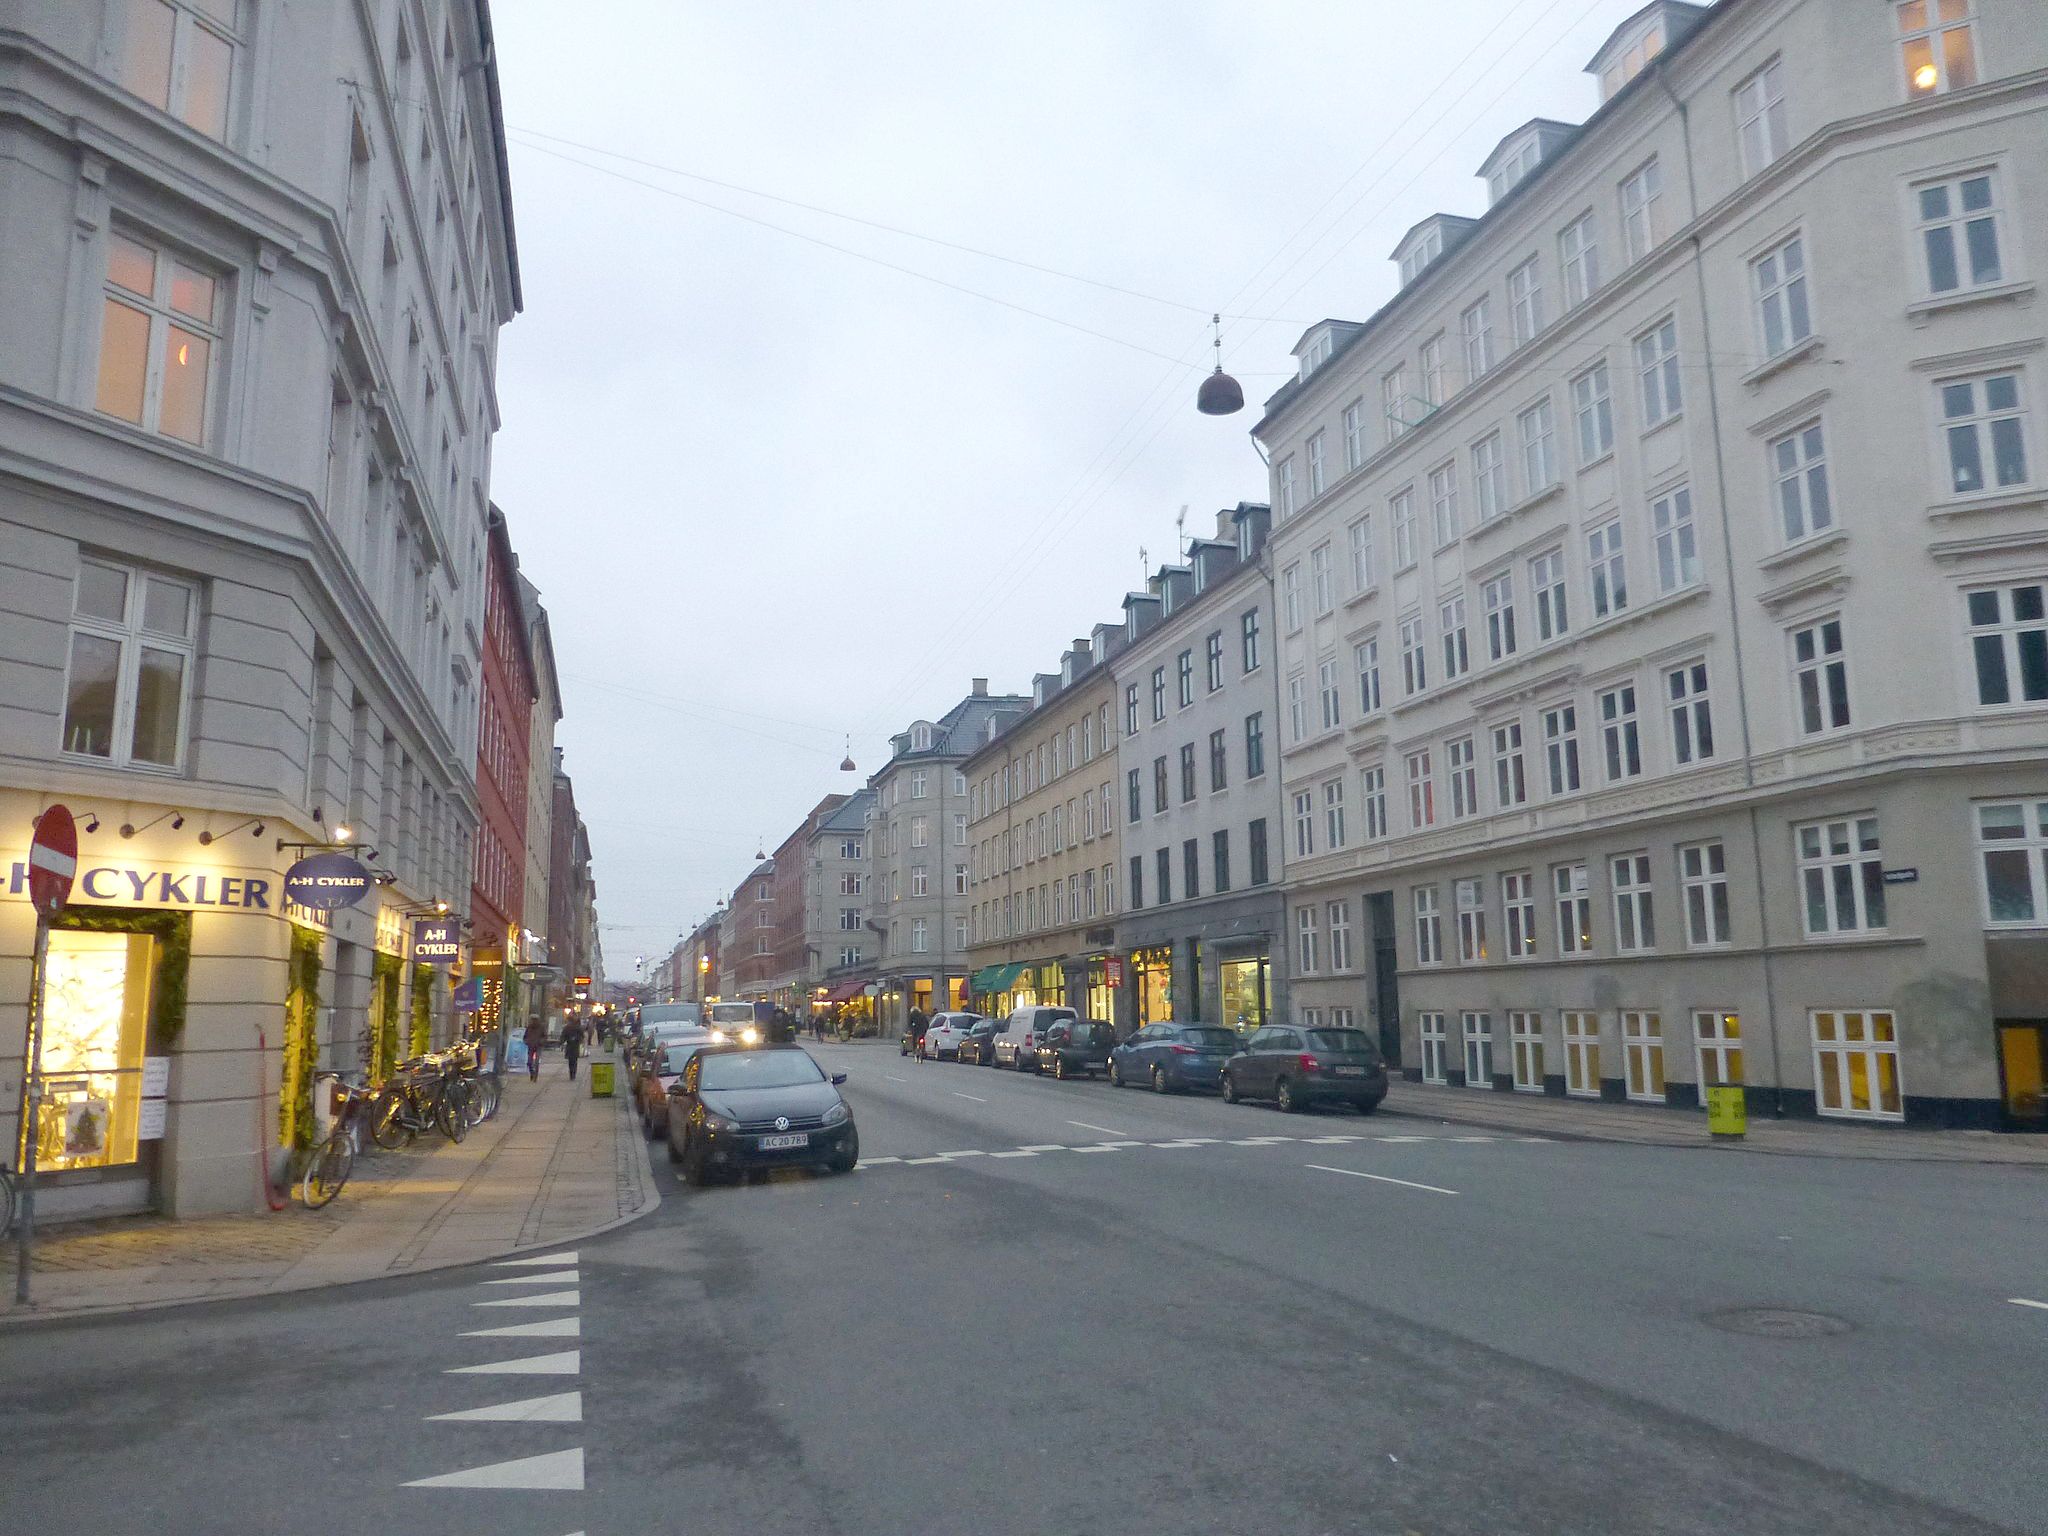 Local Round-Up: Worst streets in Copenhagen for parking fines revealed